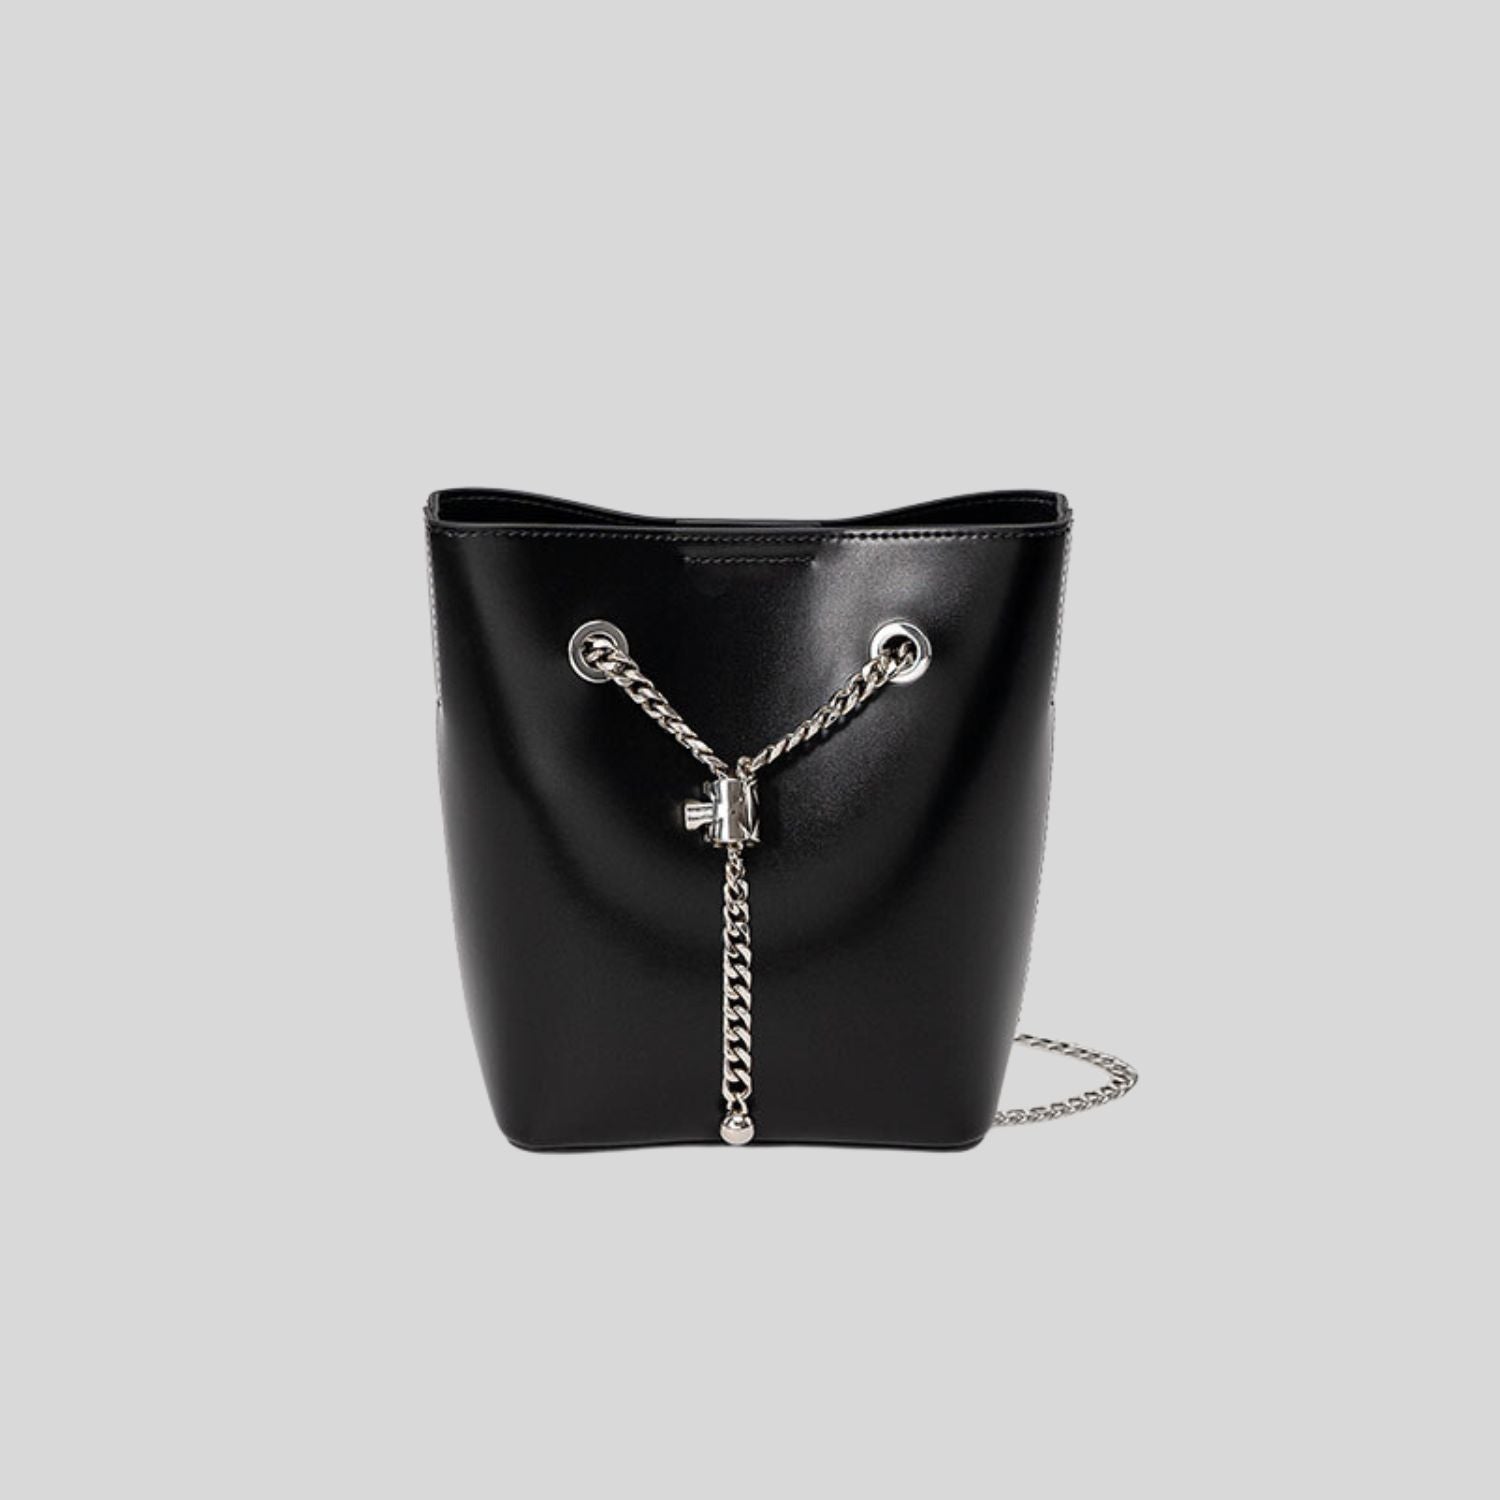 Soldier Bucket Leather Bag